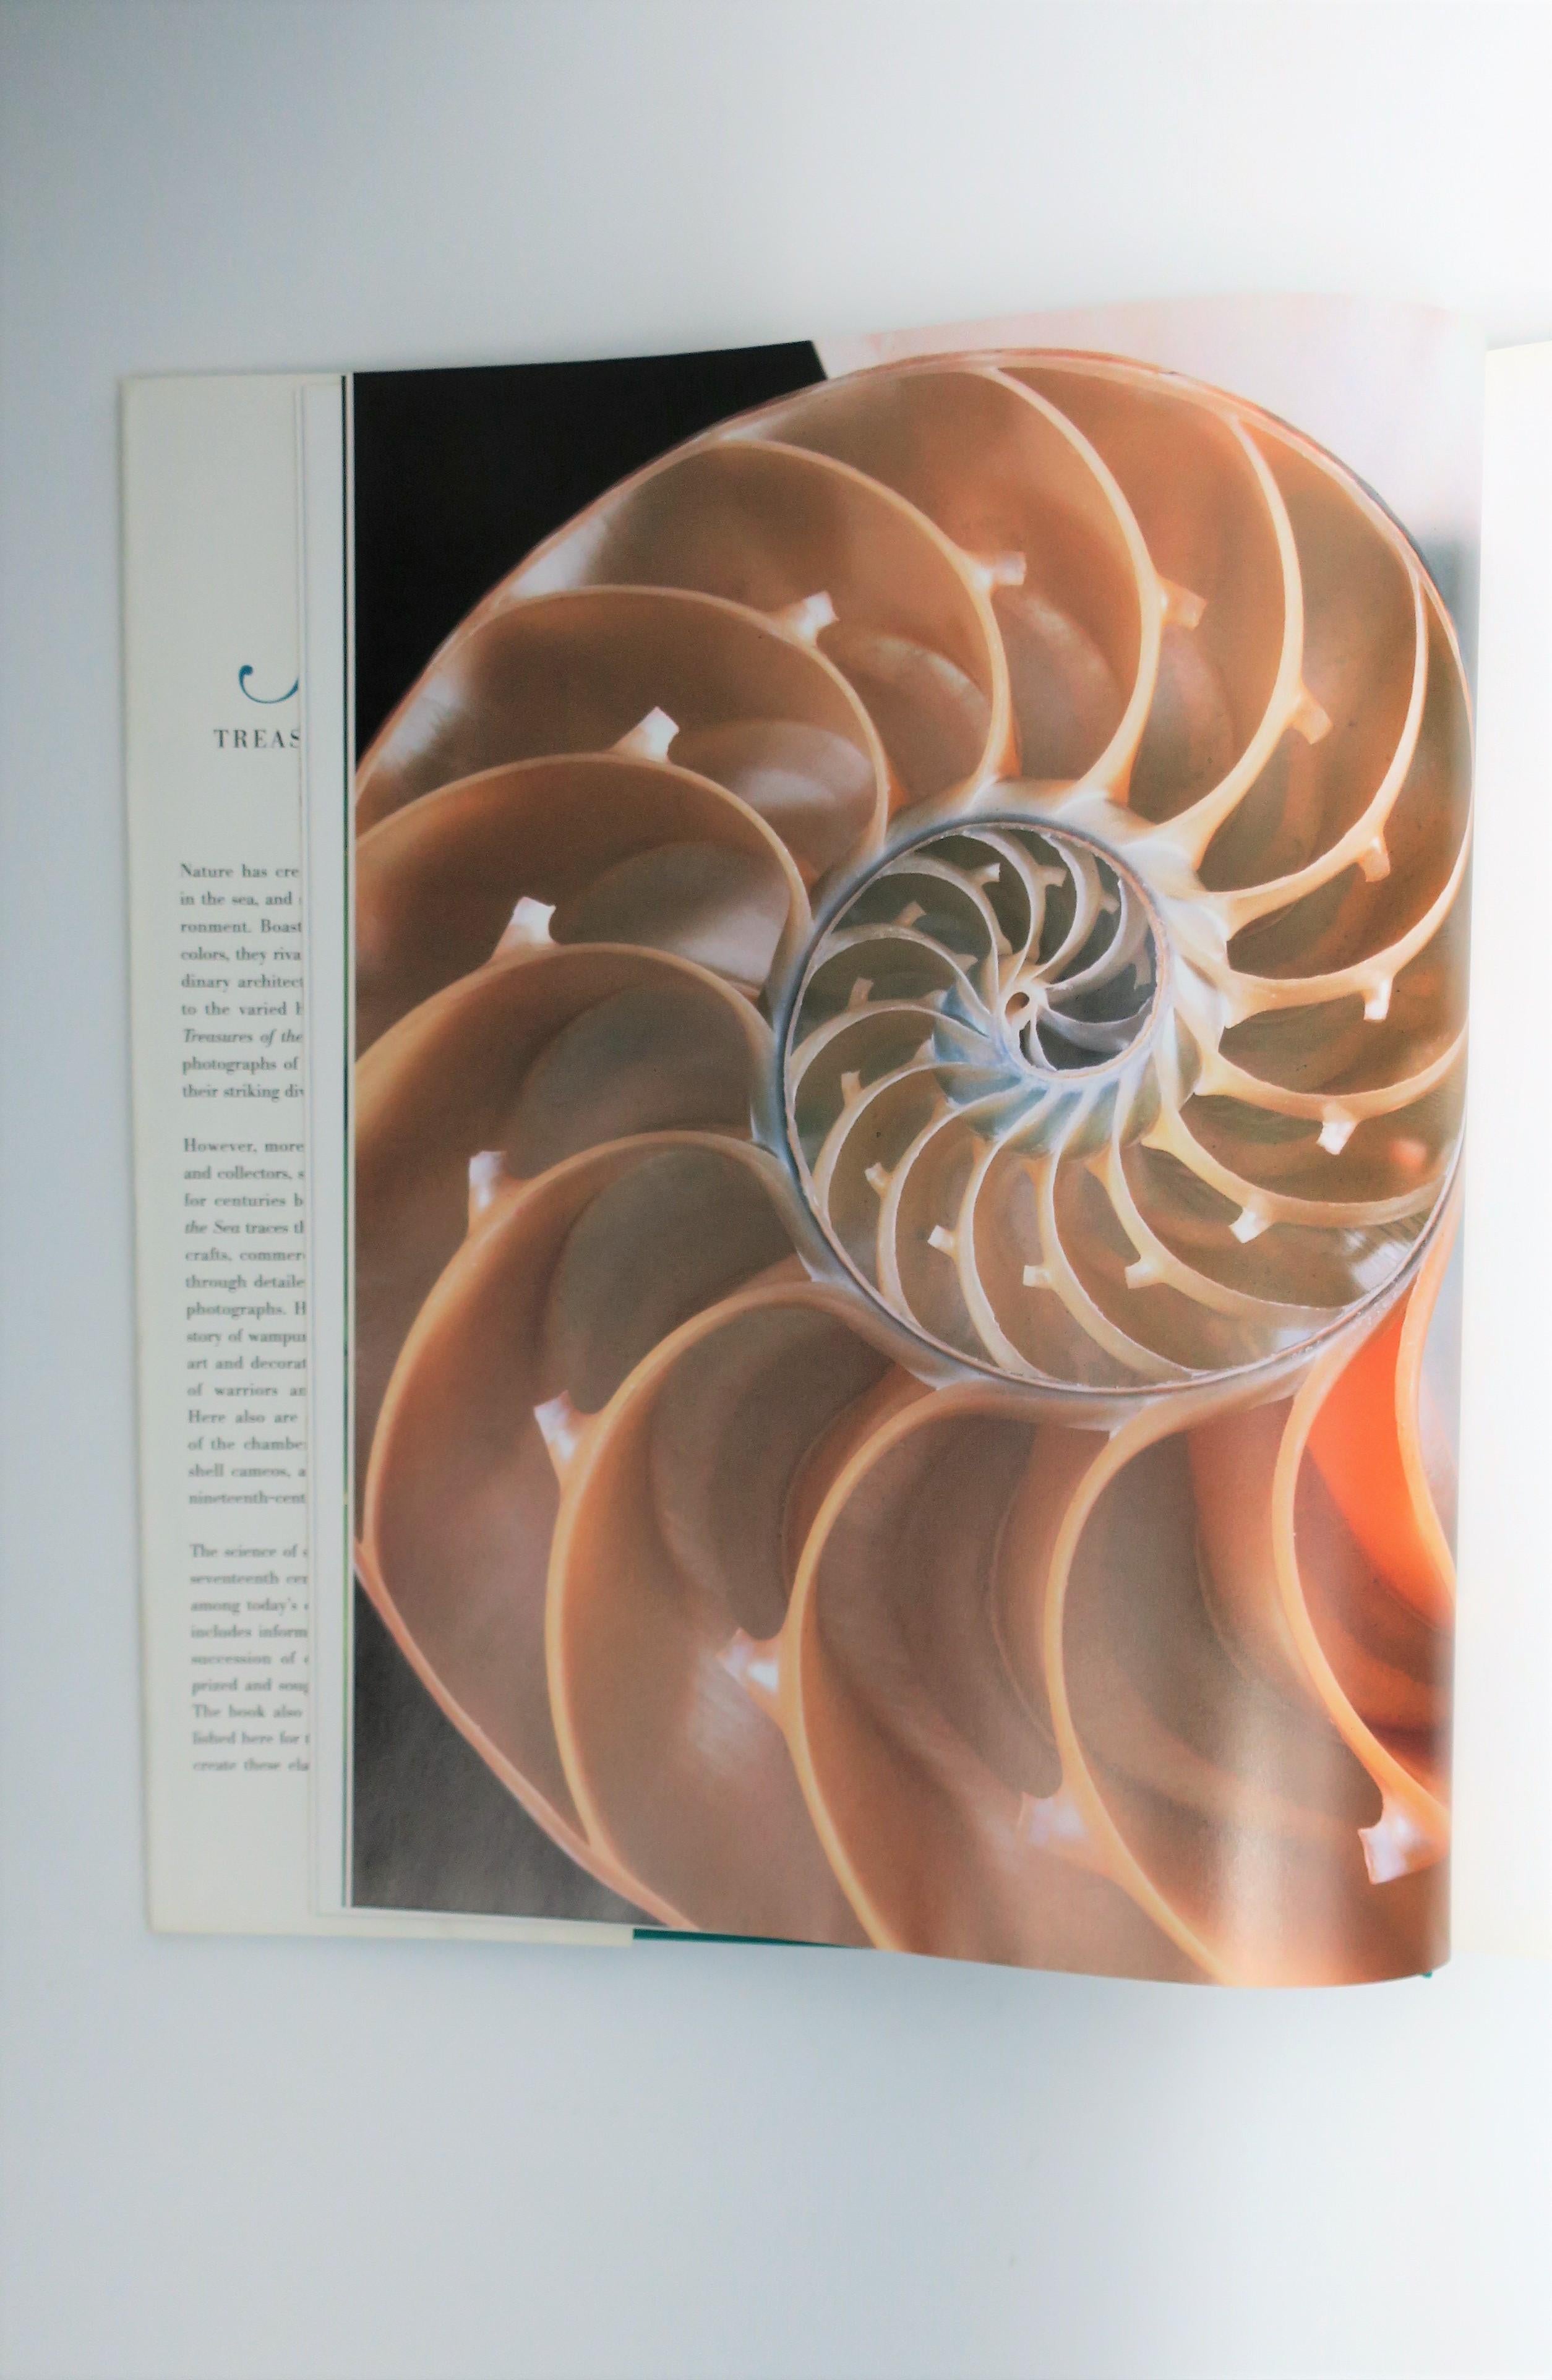 Shells 'Treasures of the Sea' Sea Shell Library or Coffee Table Book, ca. 1990s 4